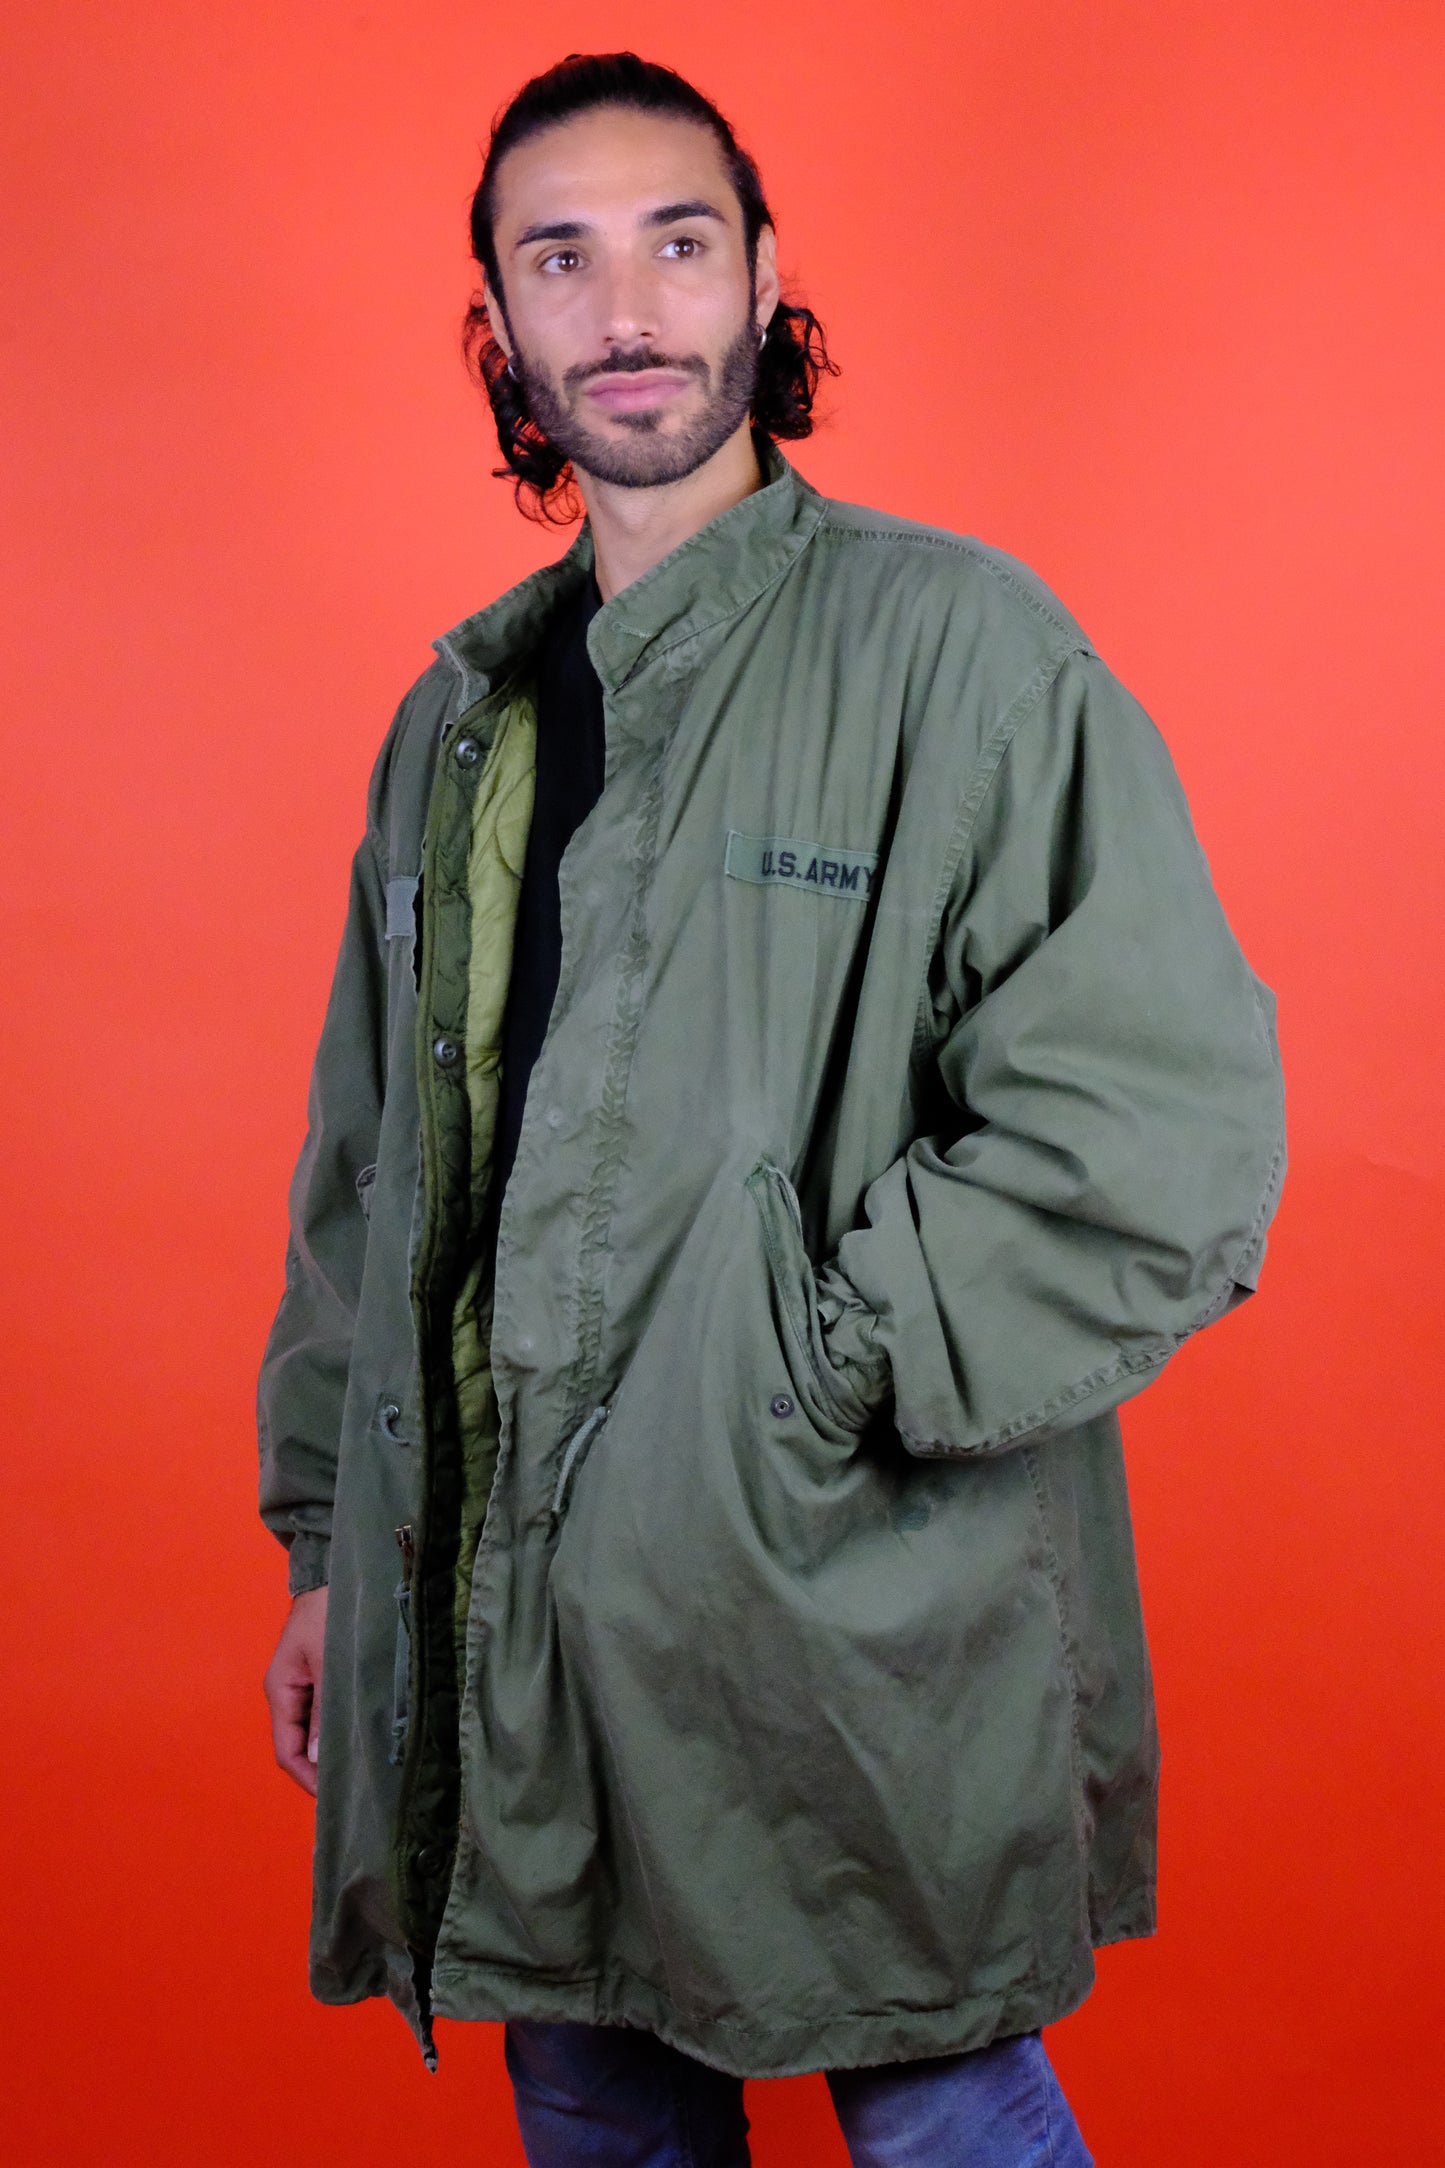 U.S. Army Cold Weather 'Fish Tail' Parka w/ Liner 'L' - vintage clothing clochard92.com